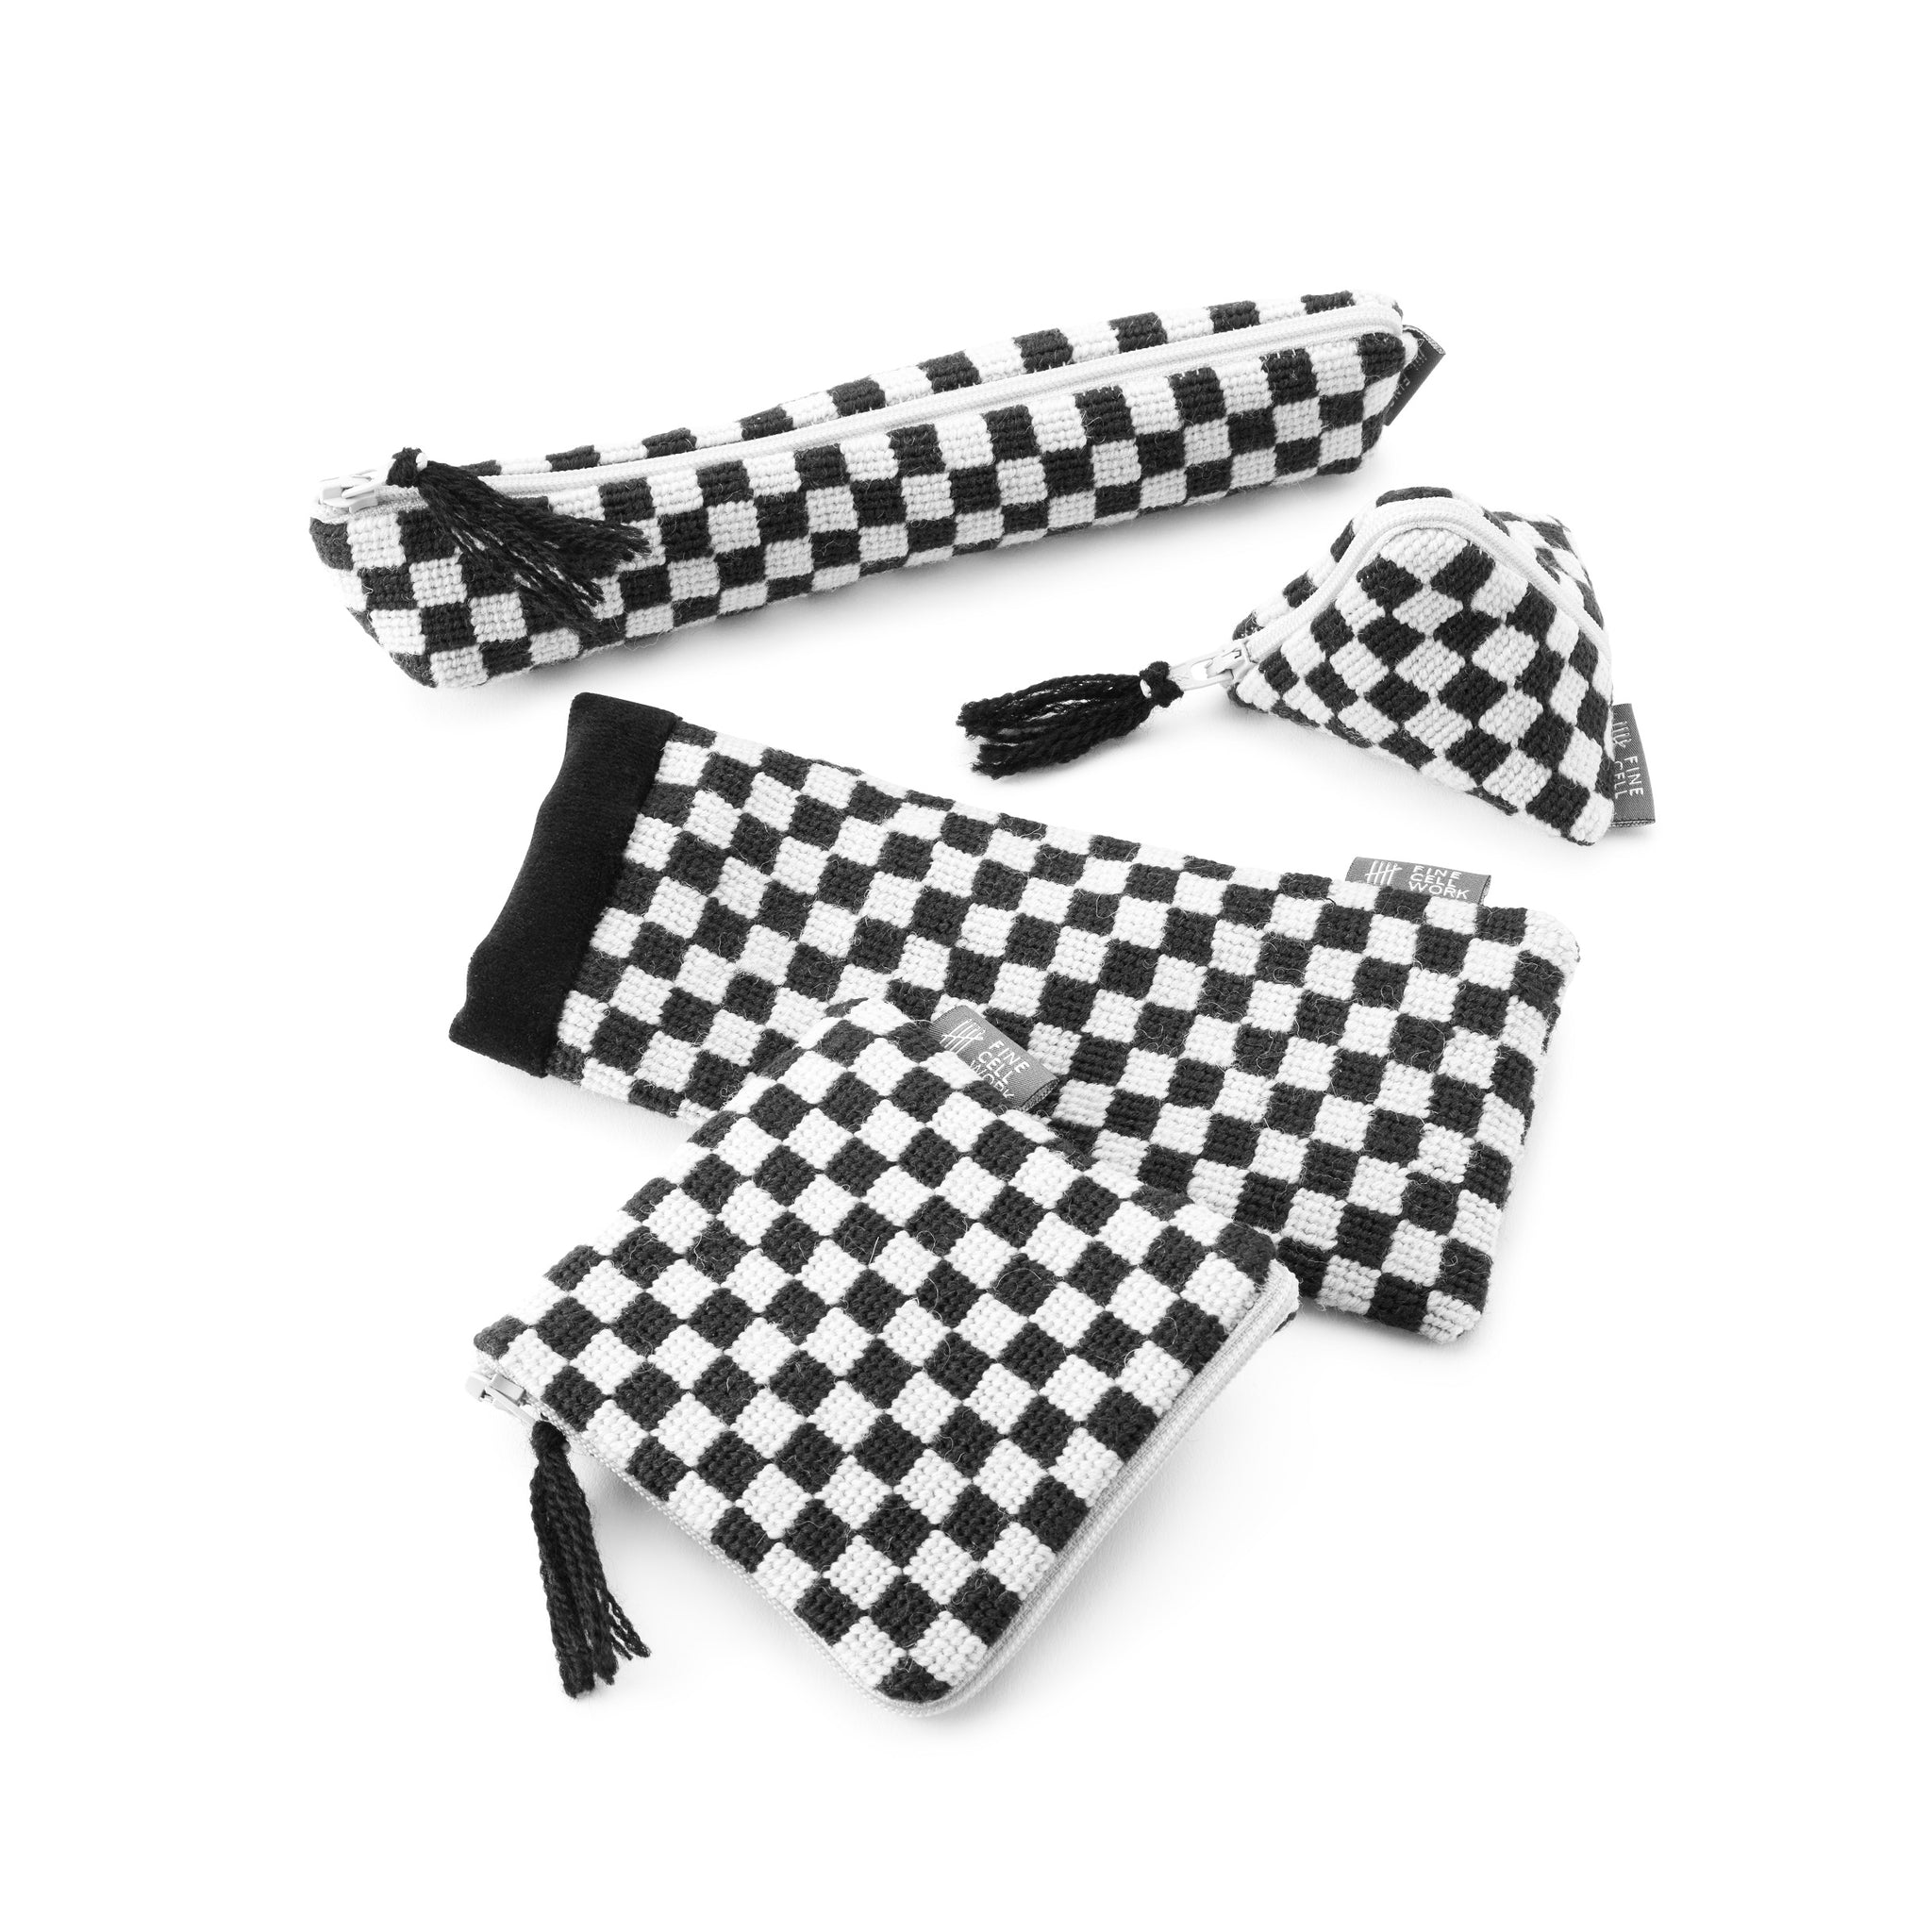 Silverstone Black and White Needlepoint Chequerboard Range Cath Kidston for Fine Cell Work